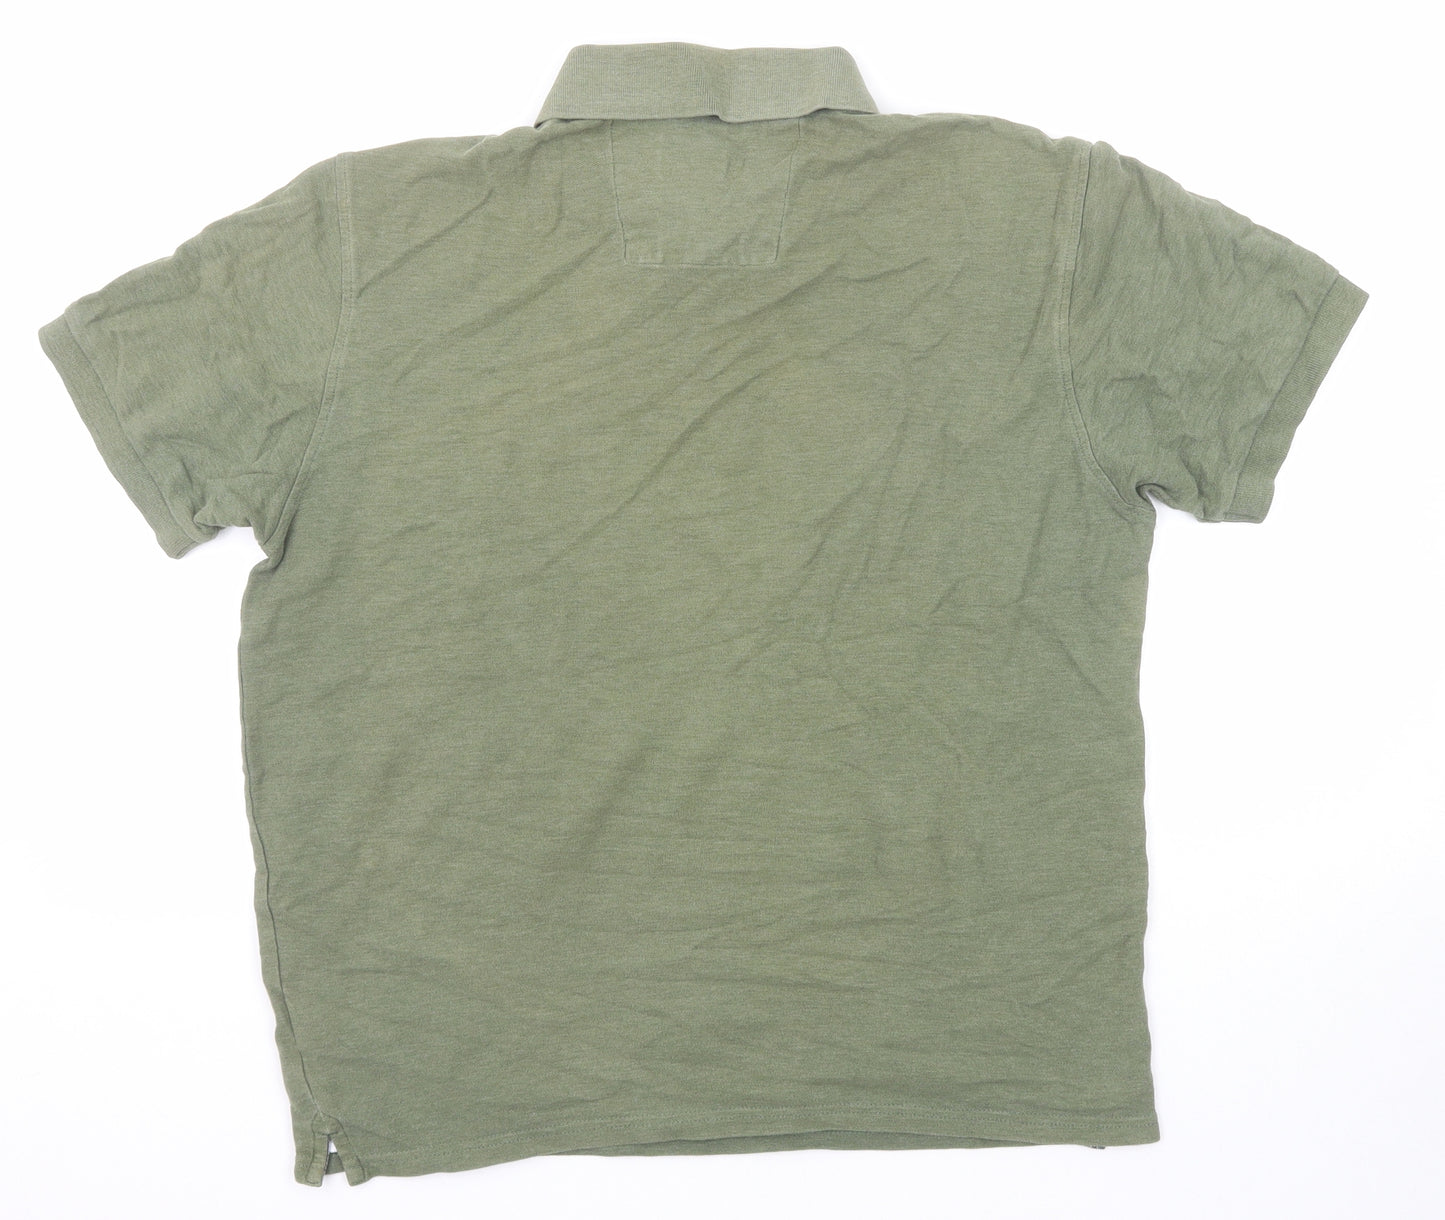 Blue Harbour Mens Green Cotton Polo Size M Collared Button